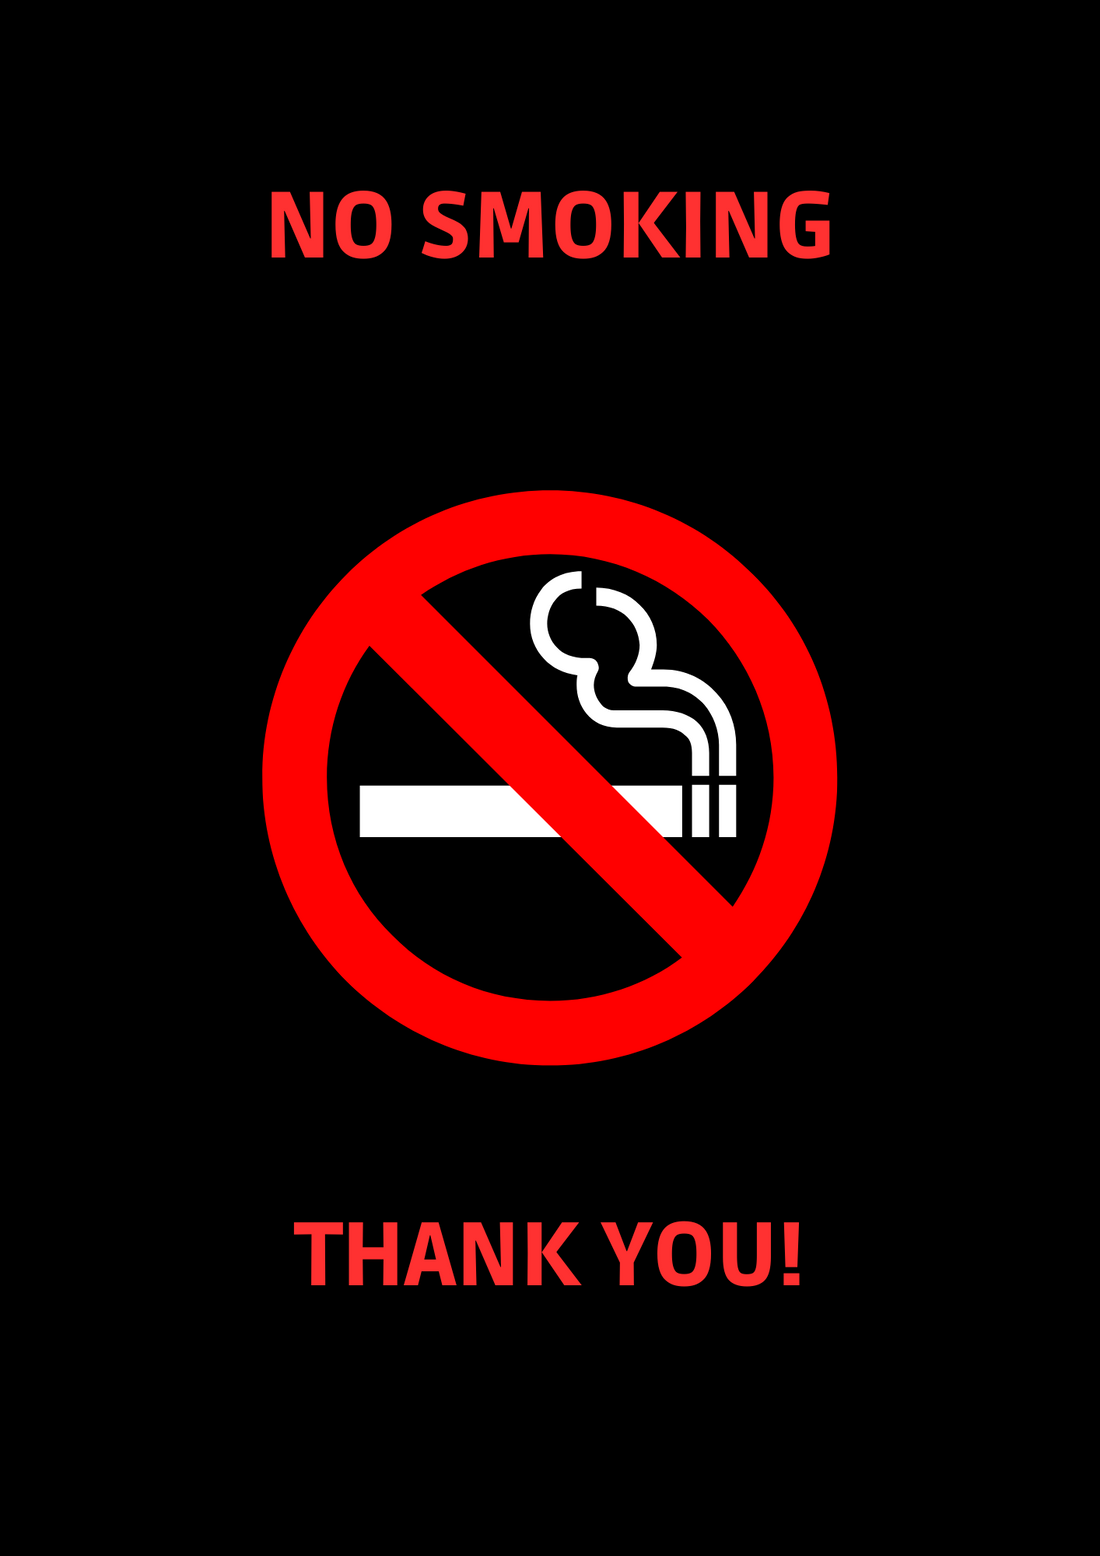 A poster indicating no smoking permitted